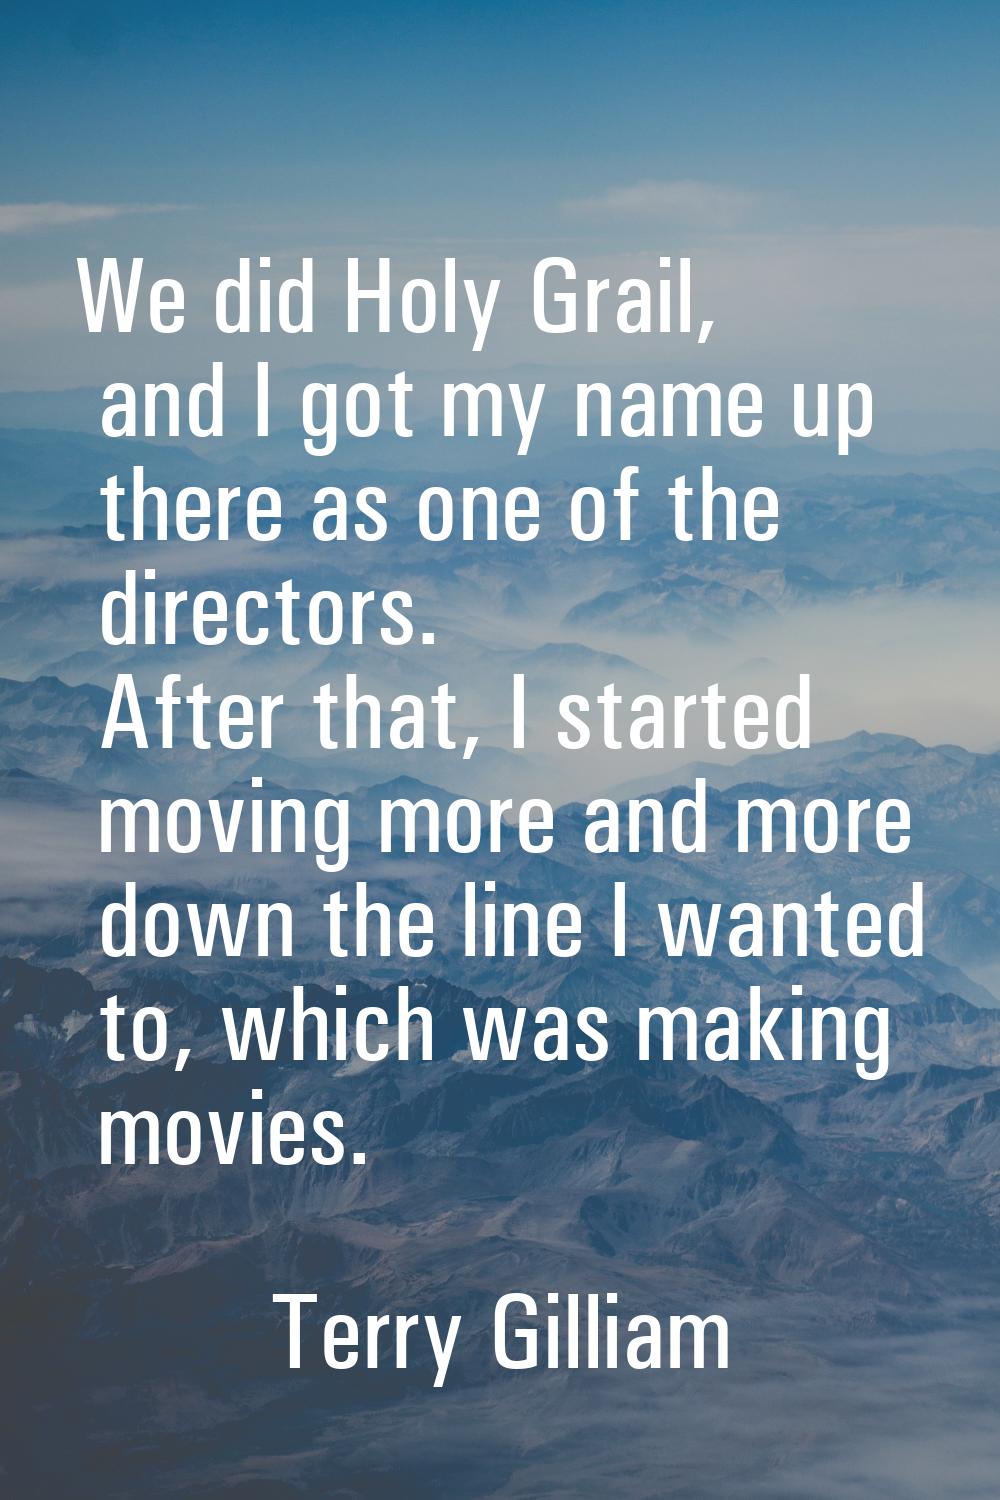 We did Holy Grail, and I got my name up there as one of the directors. After that, I started moving